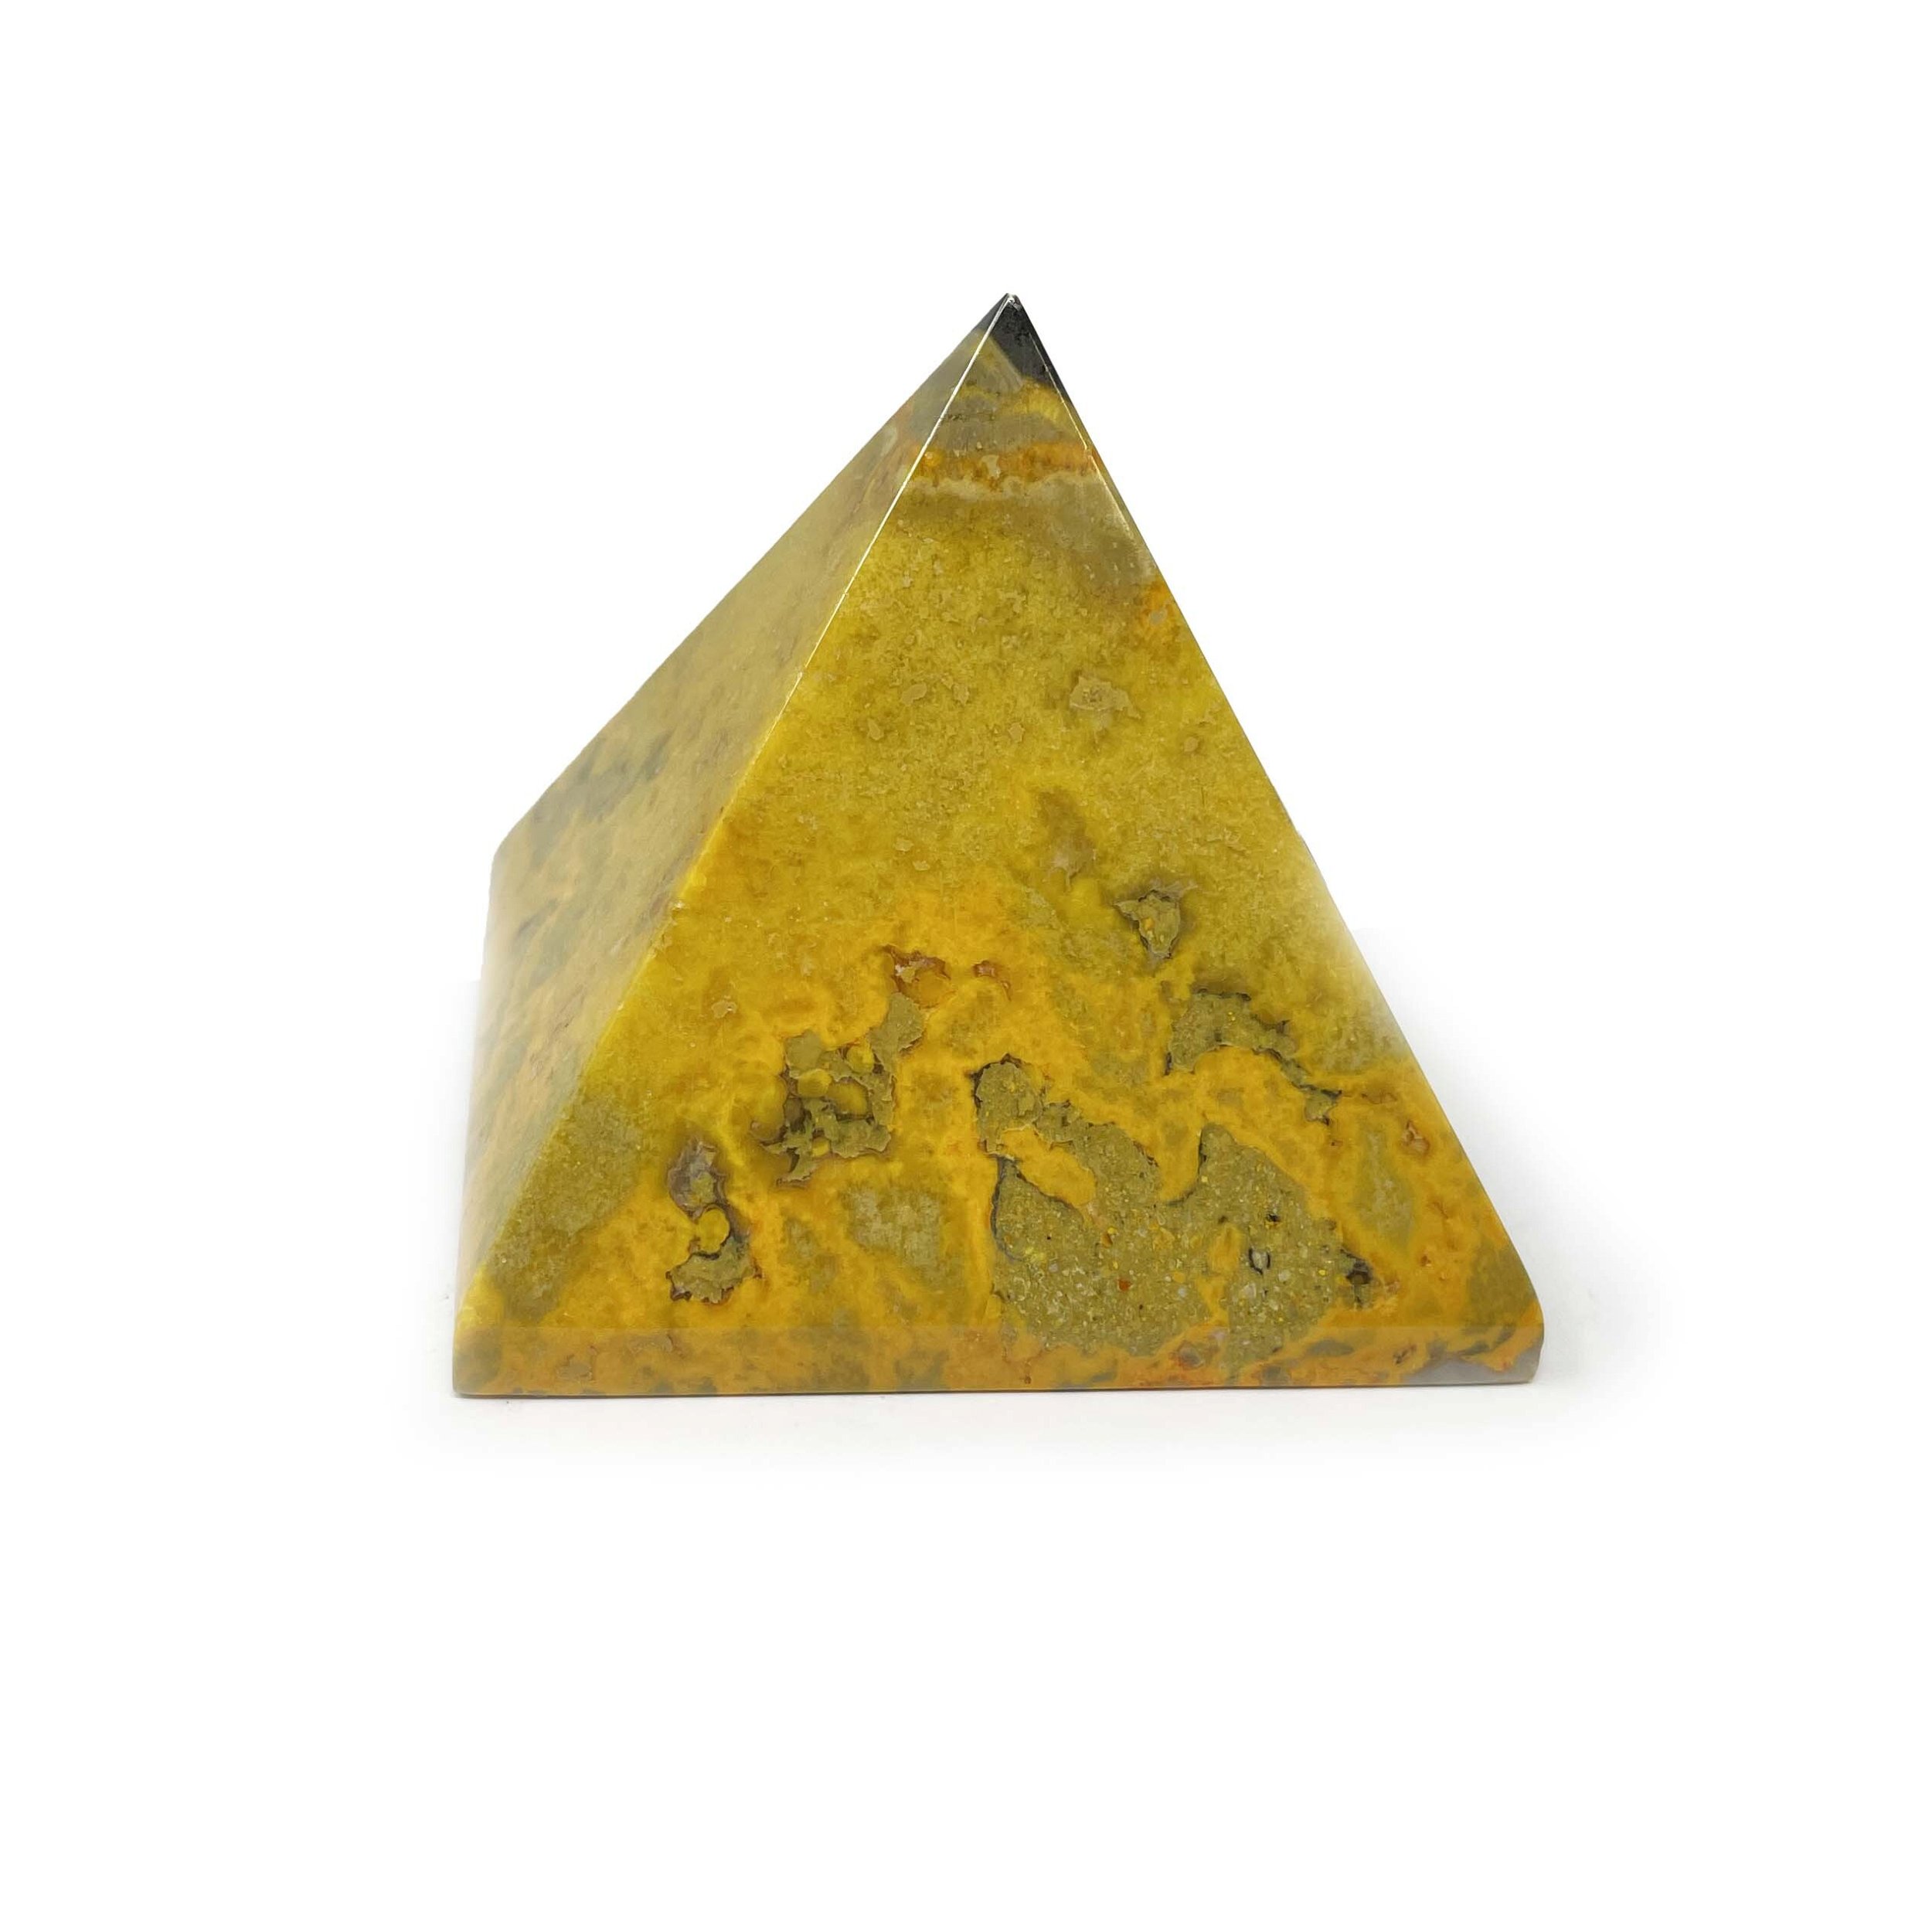 Bumblebee Jasper Pyramid - Black Point With Yellow Body And Gray And Orange Base